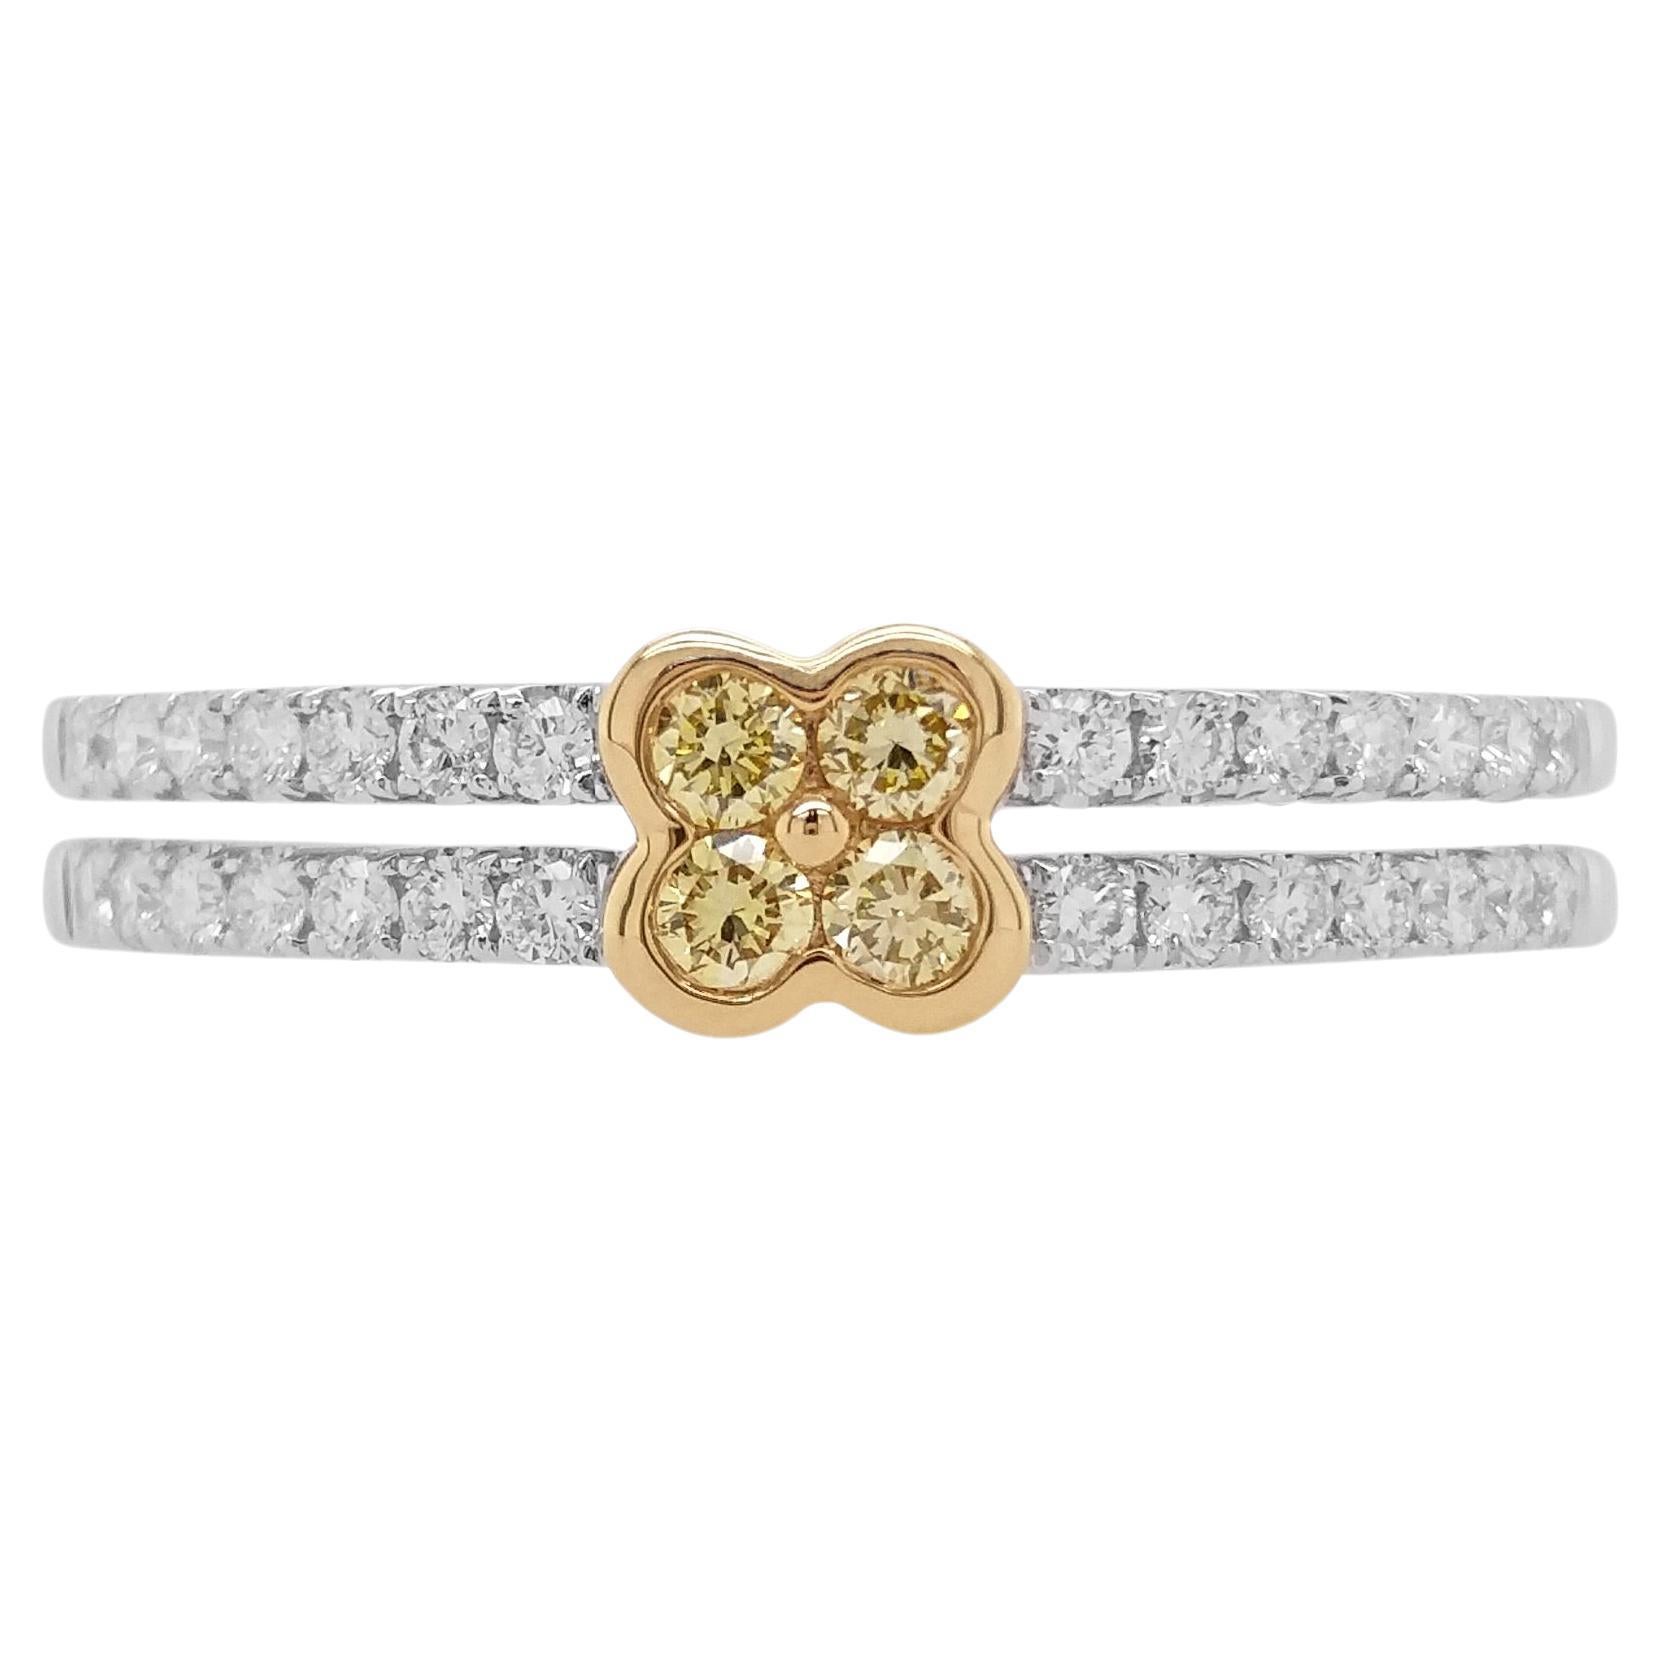 Round Brilliant Cut Yellow Diamond and White Diamond Band Ring made in 18K Gold For Sale